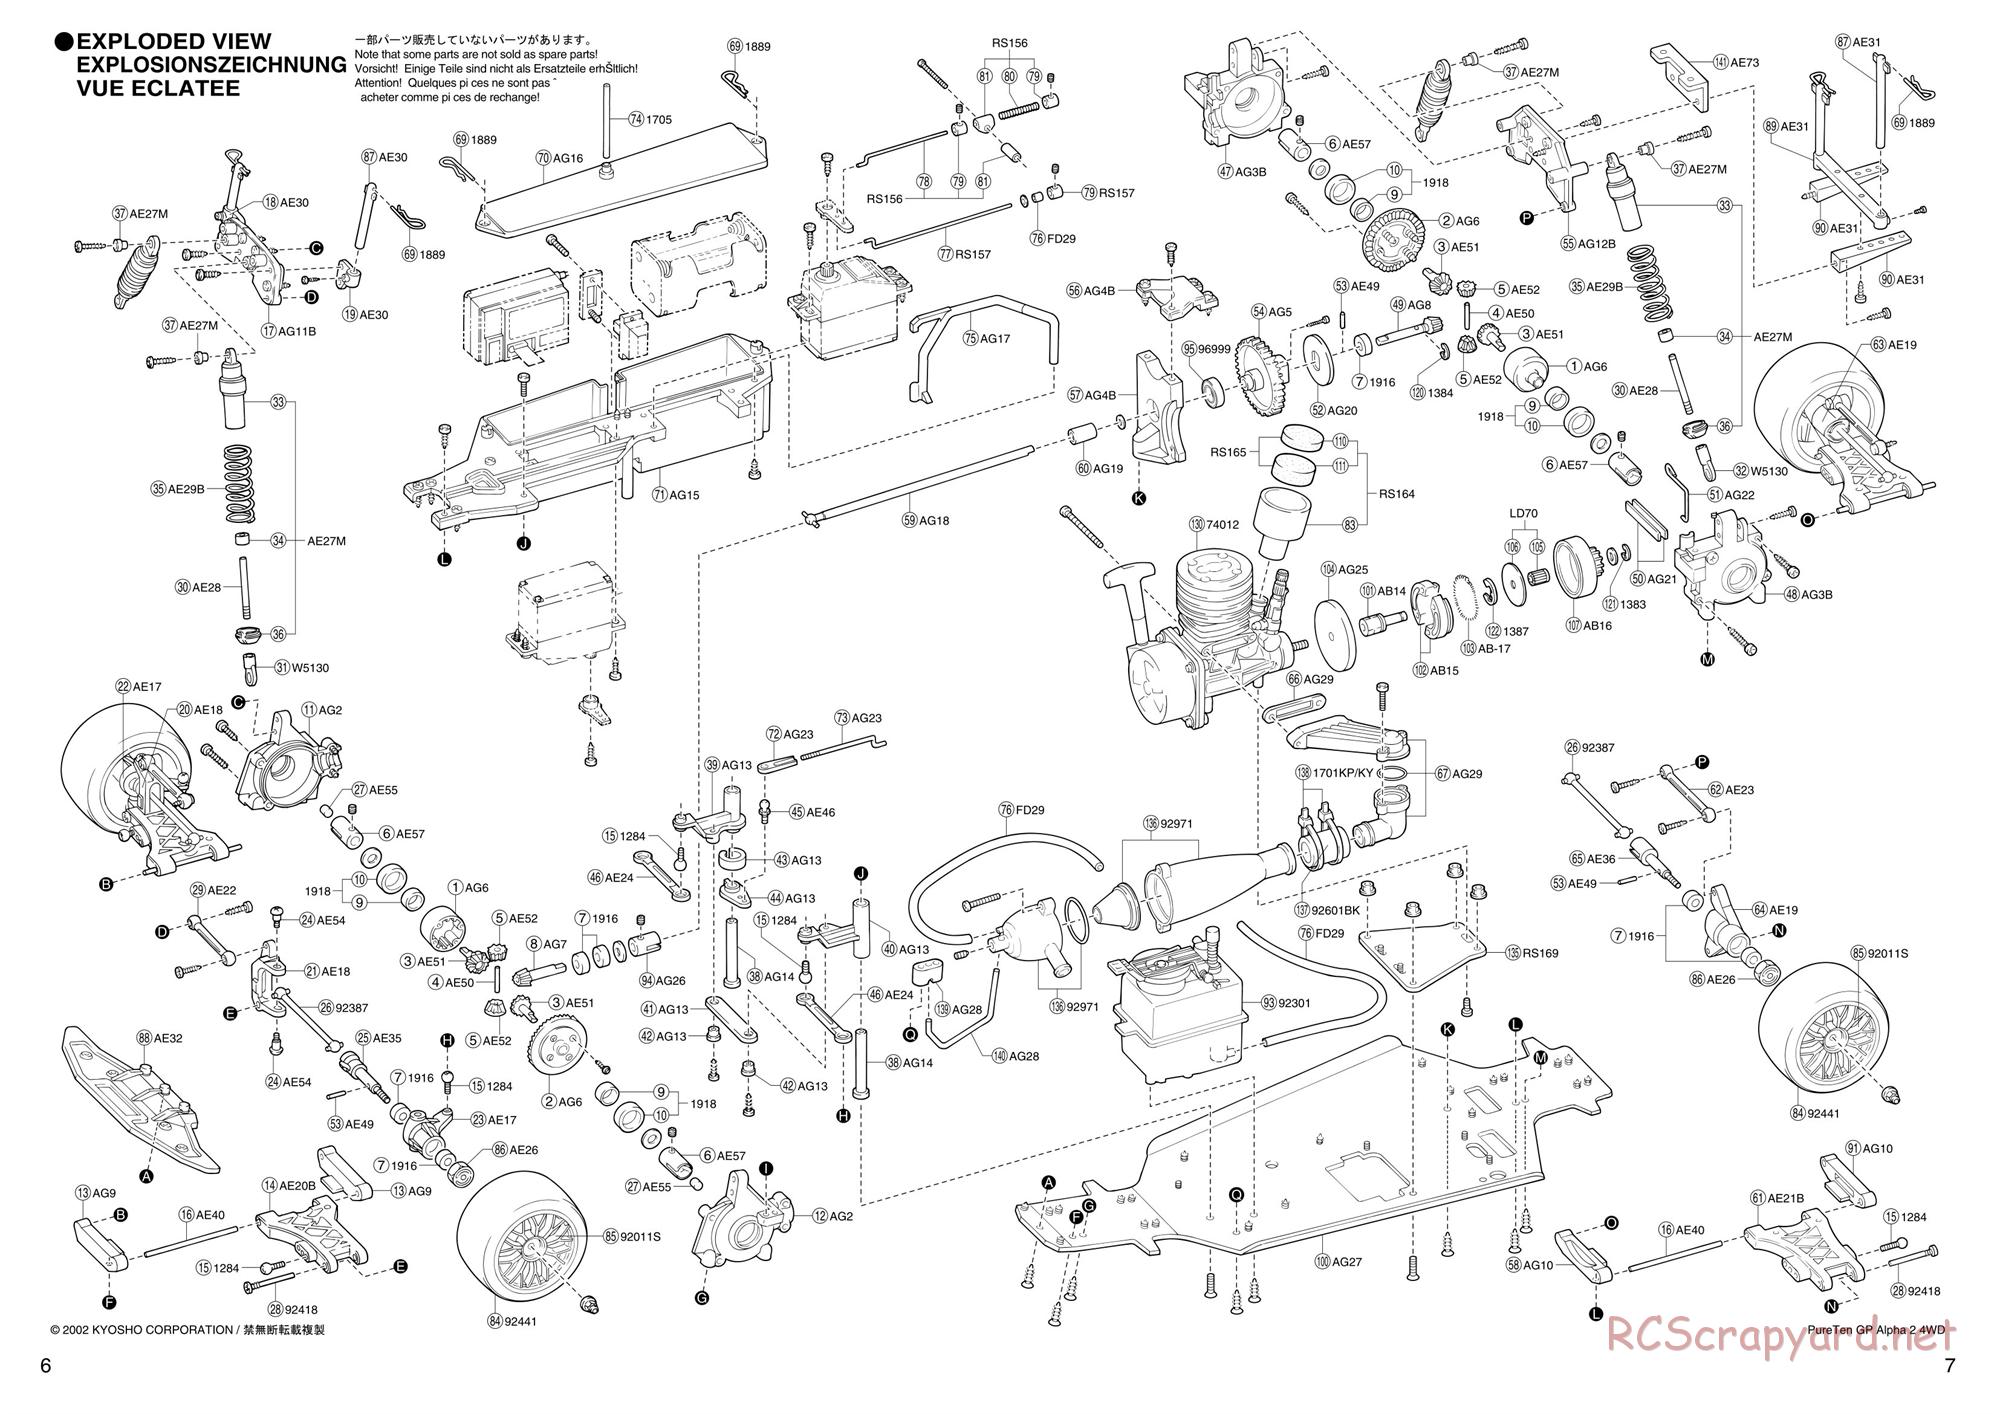 Kyosho - PureTen GP Alpha 2 - Exploded Views - Page 1